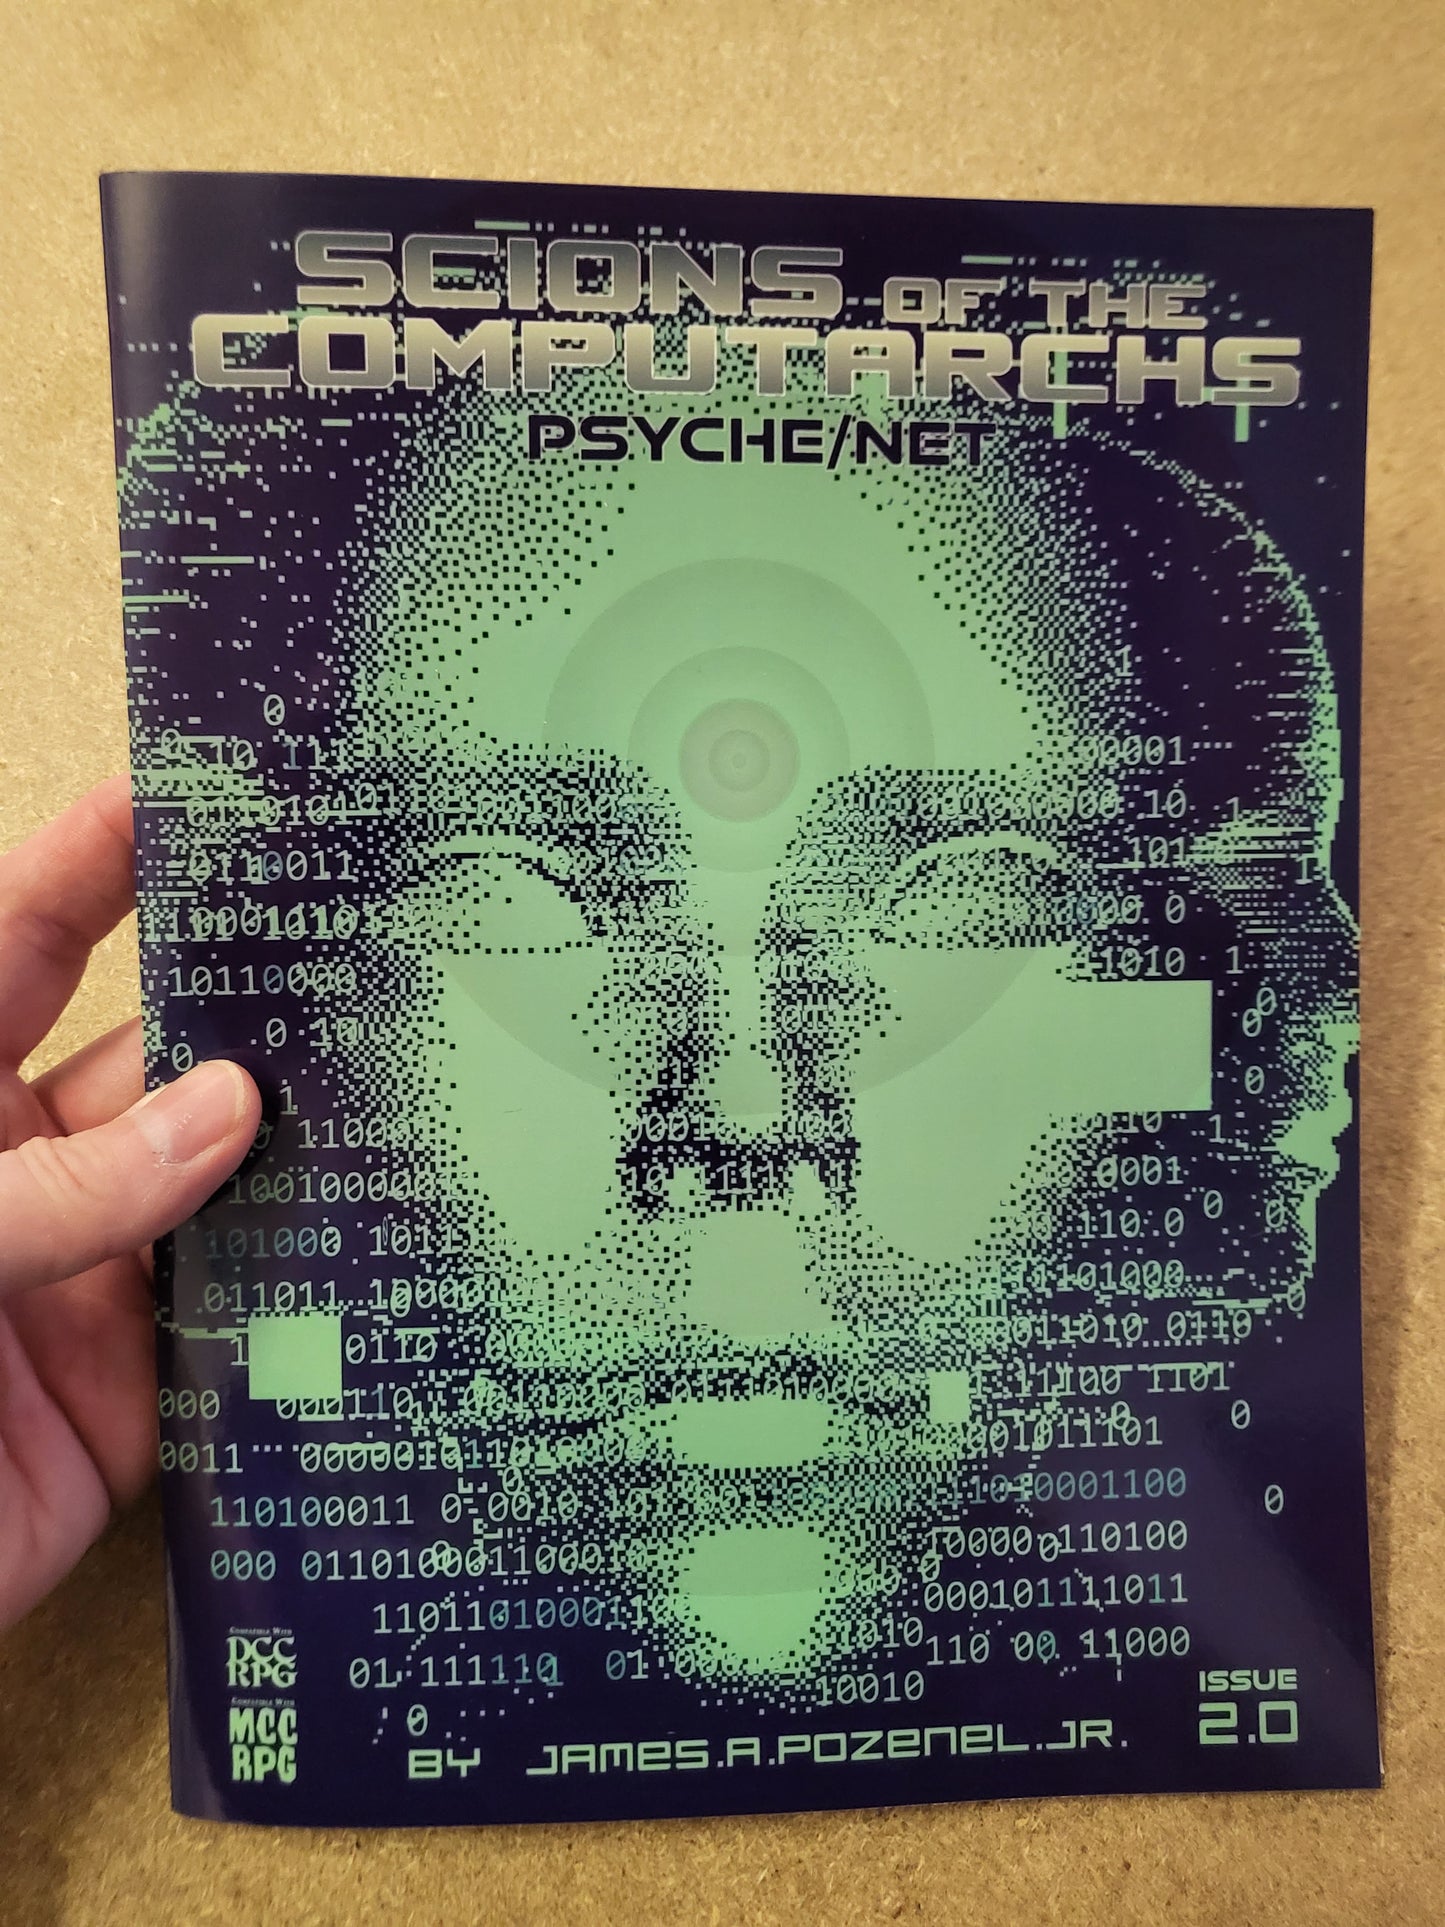 Pozenel, James A., Jr. - Scions of the Computarchs: Psyche/Net - Issue 2.0